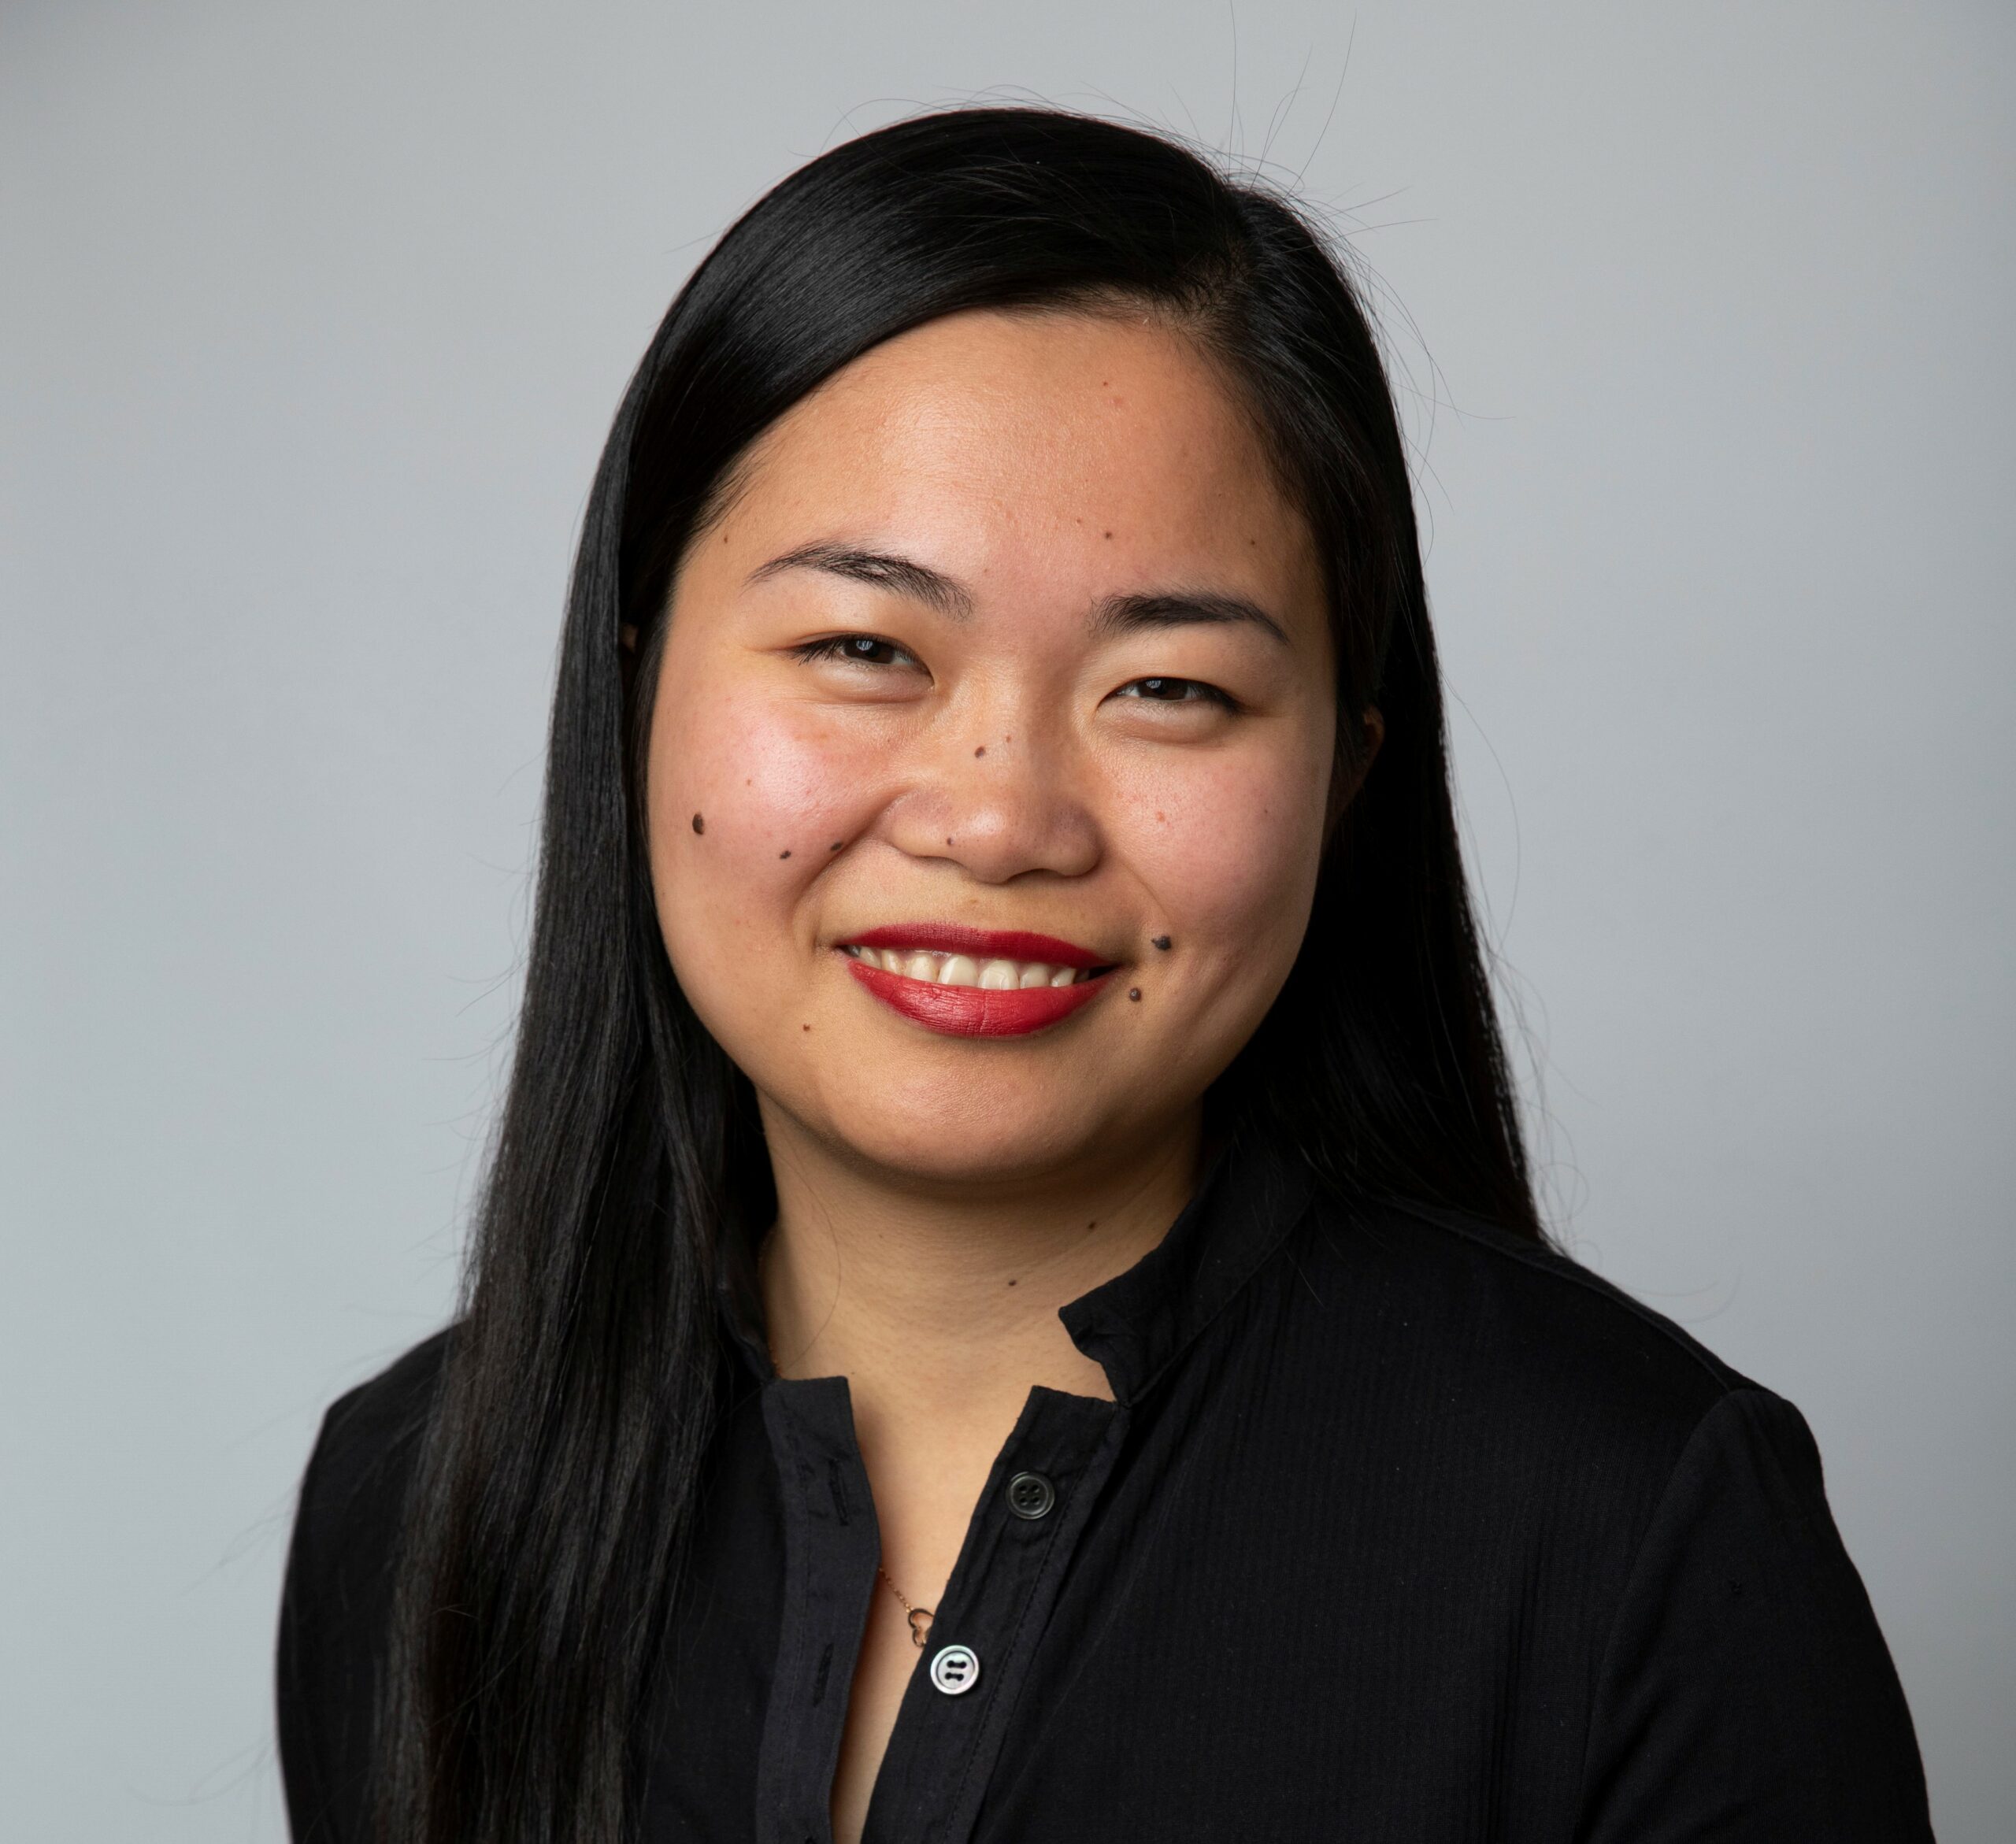 Q. Jane Zhao in a black collared top in front of a gray background.